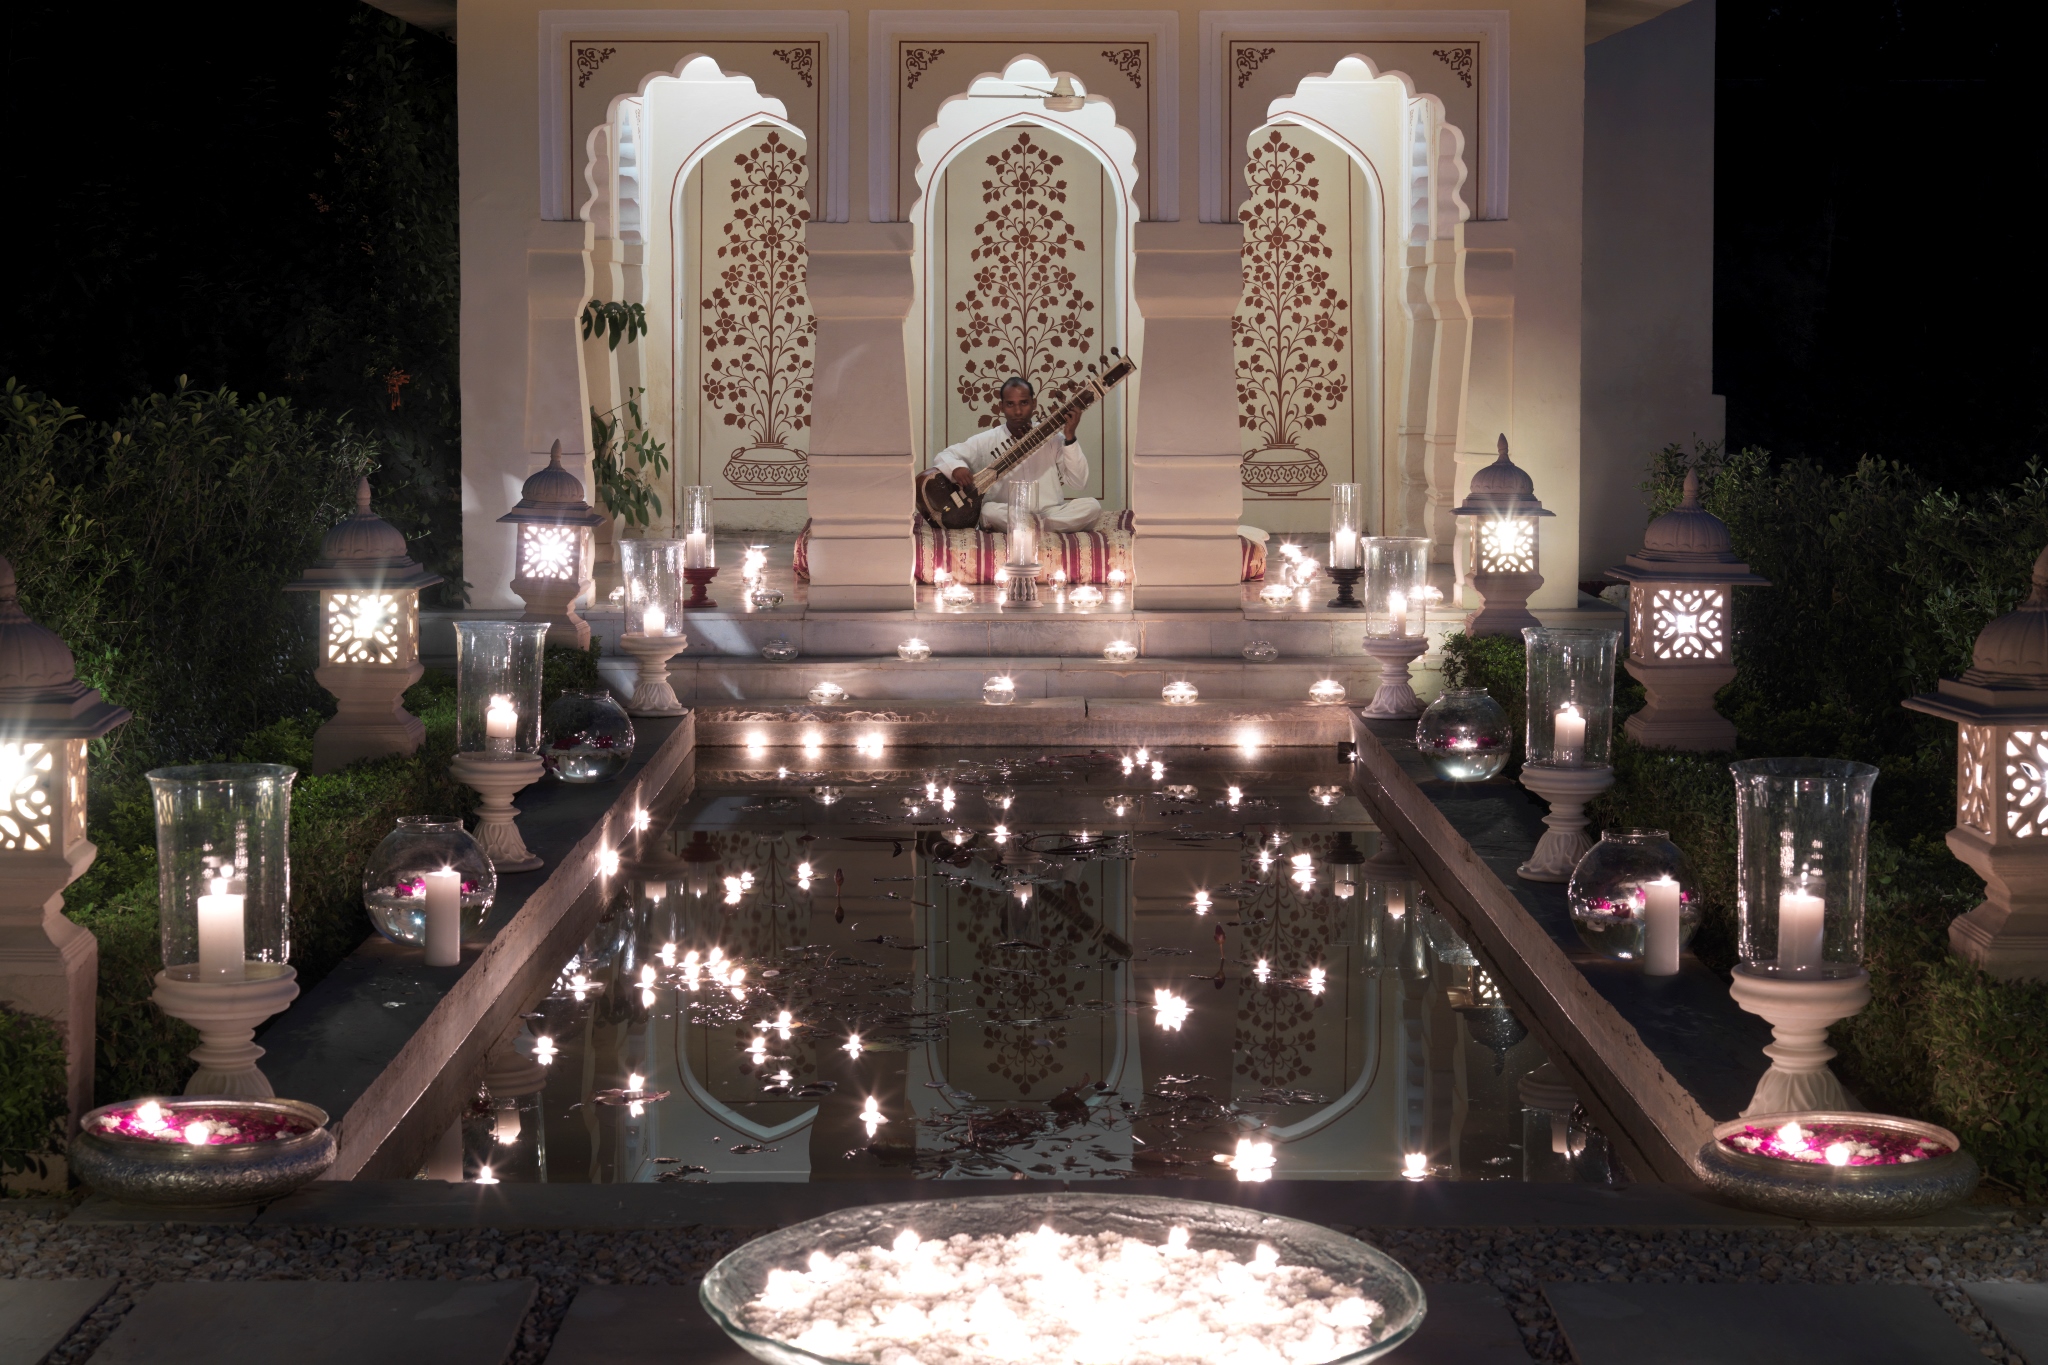 Hotels to Propose in India